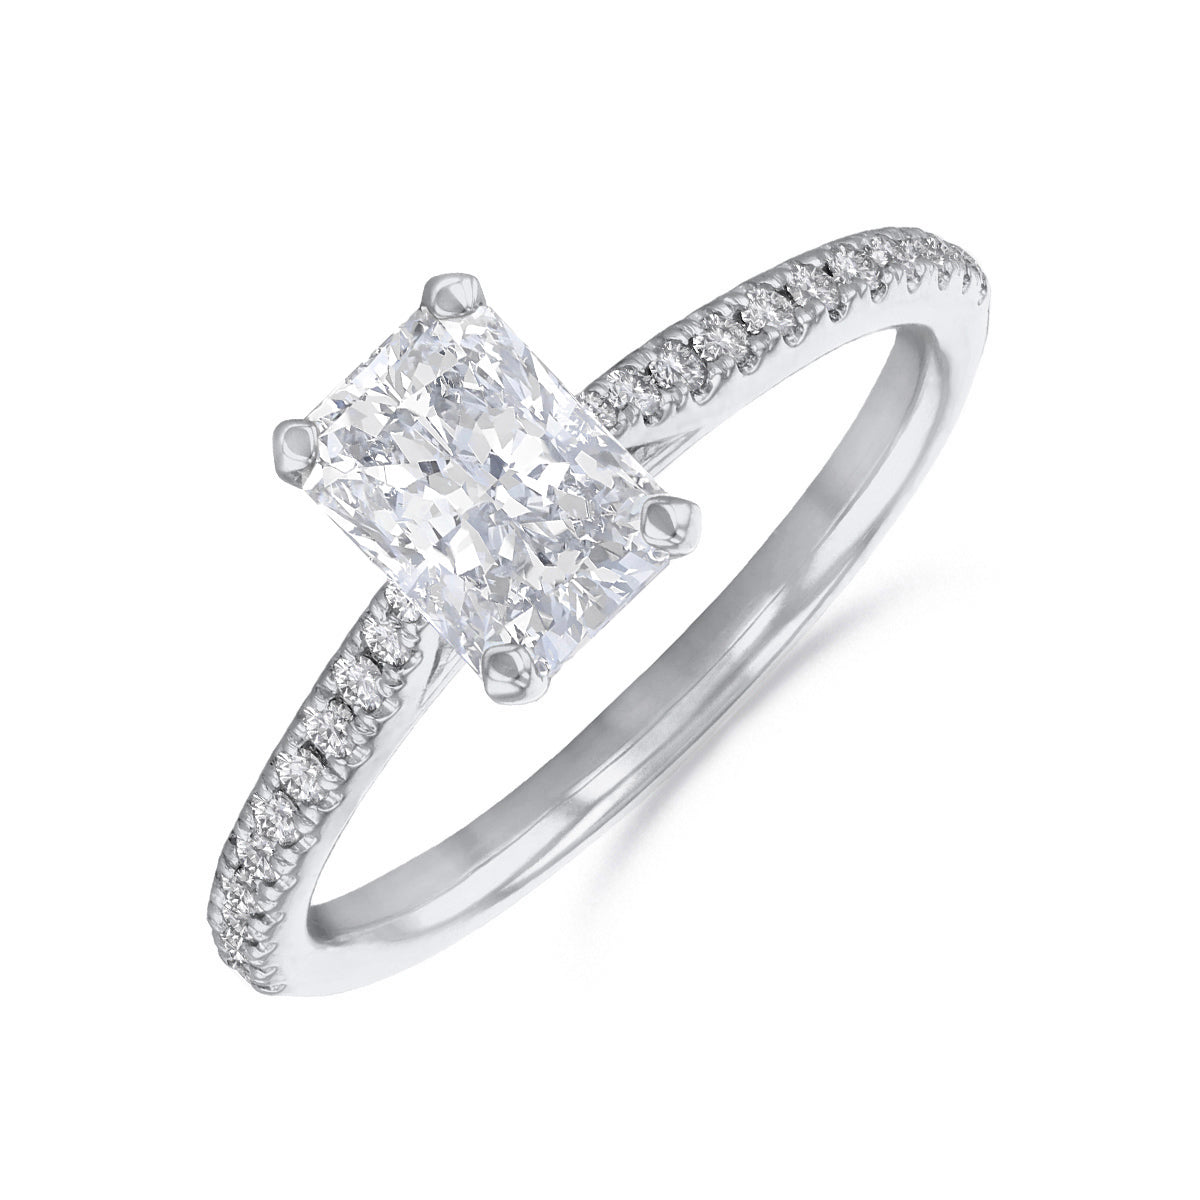 0-25ct-ophelia-shoulder-set-radiant-cut-solitaire-diamond-engagement-ring-18ct-white-gold